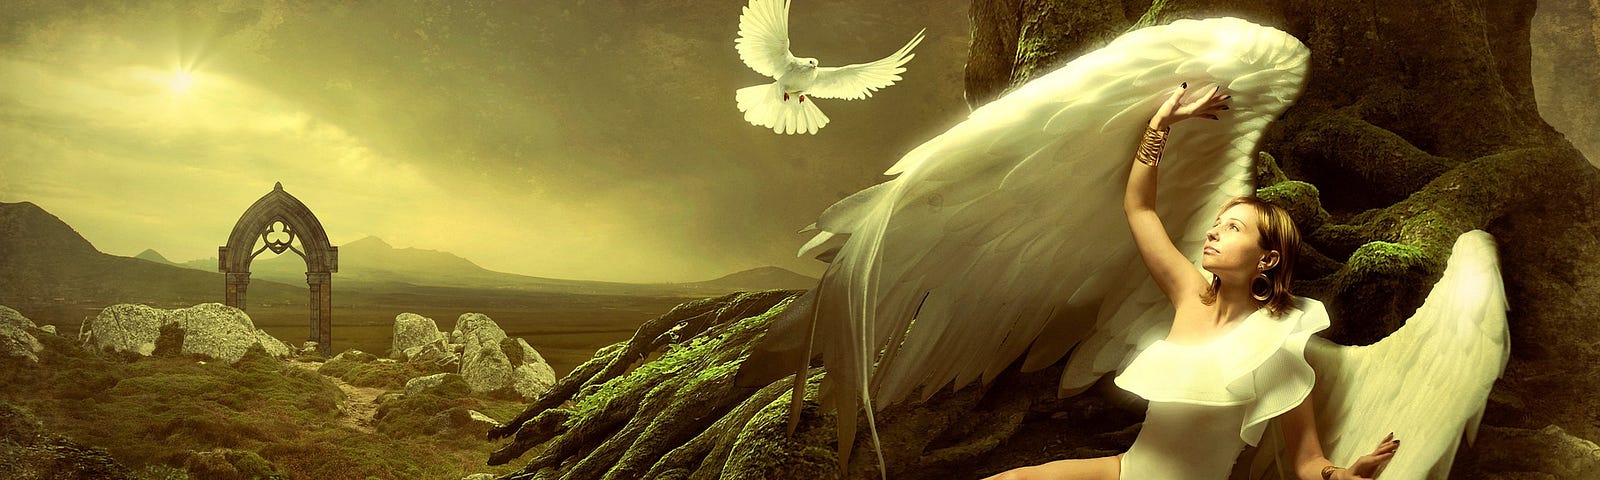 A woman with wings sits at the base of a tree, one wing curved over her head. A dove flies over her. In the background, a stone arch rises from a rocky field. In the sky, the sun breaks through the clouds.